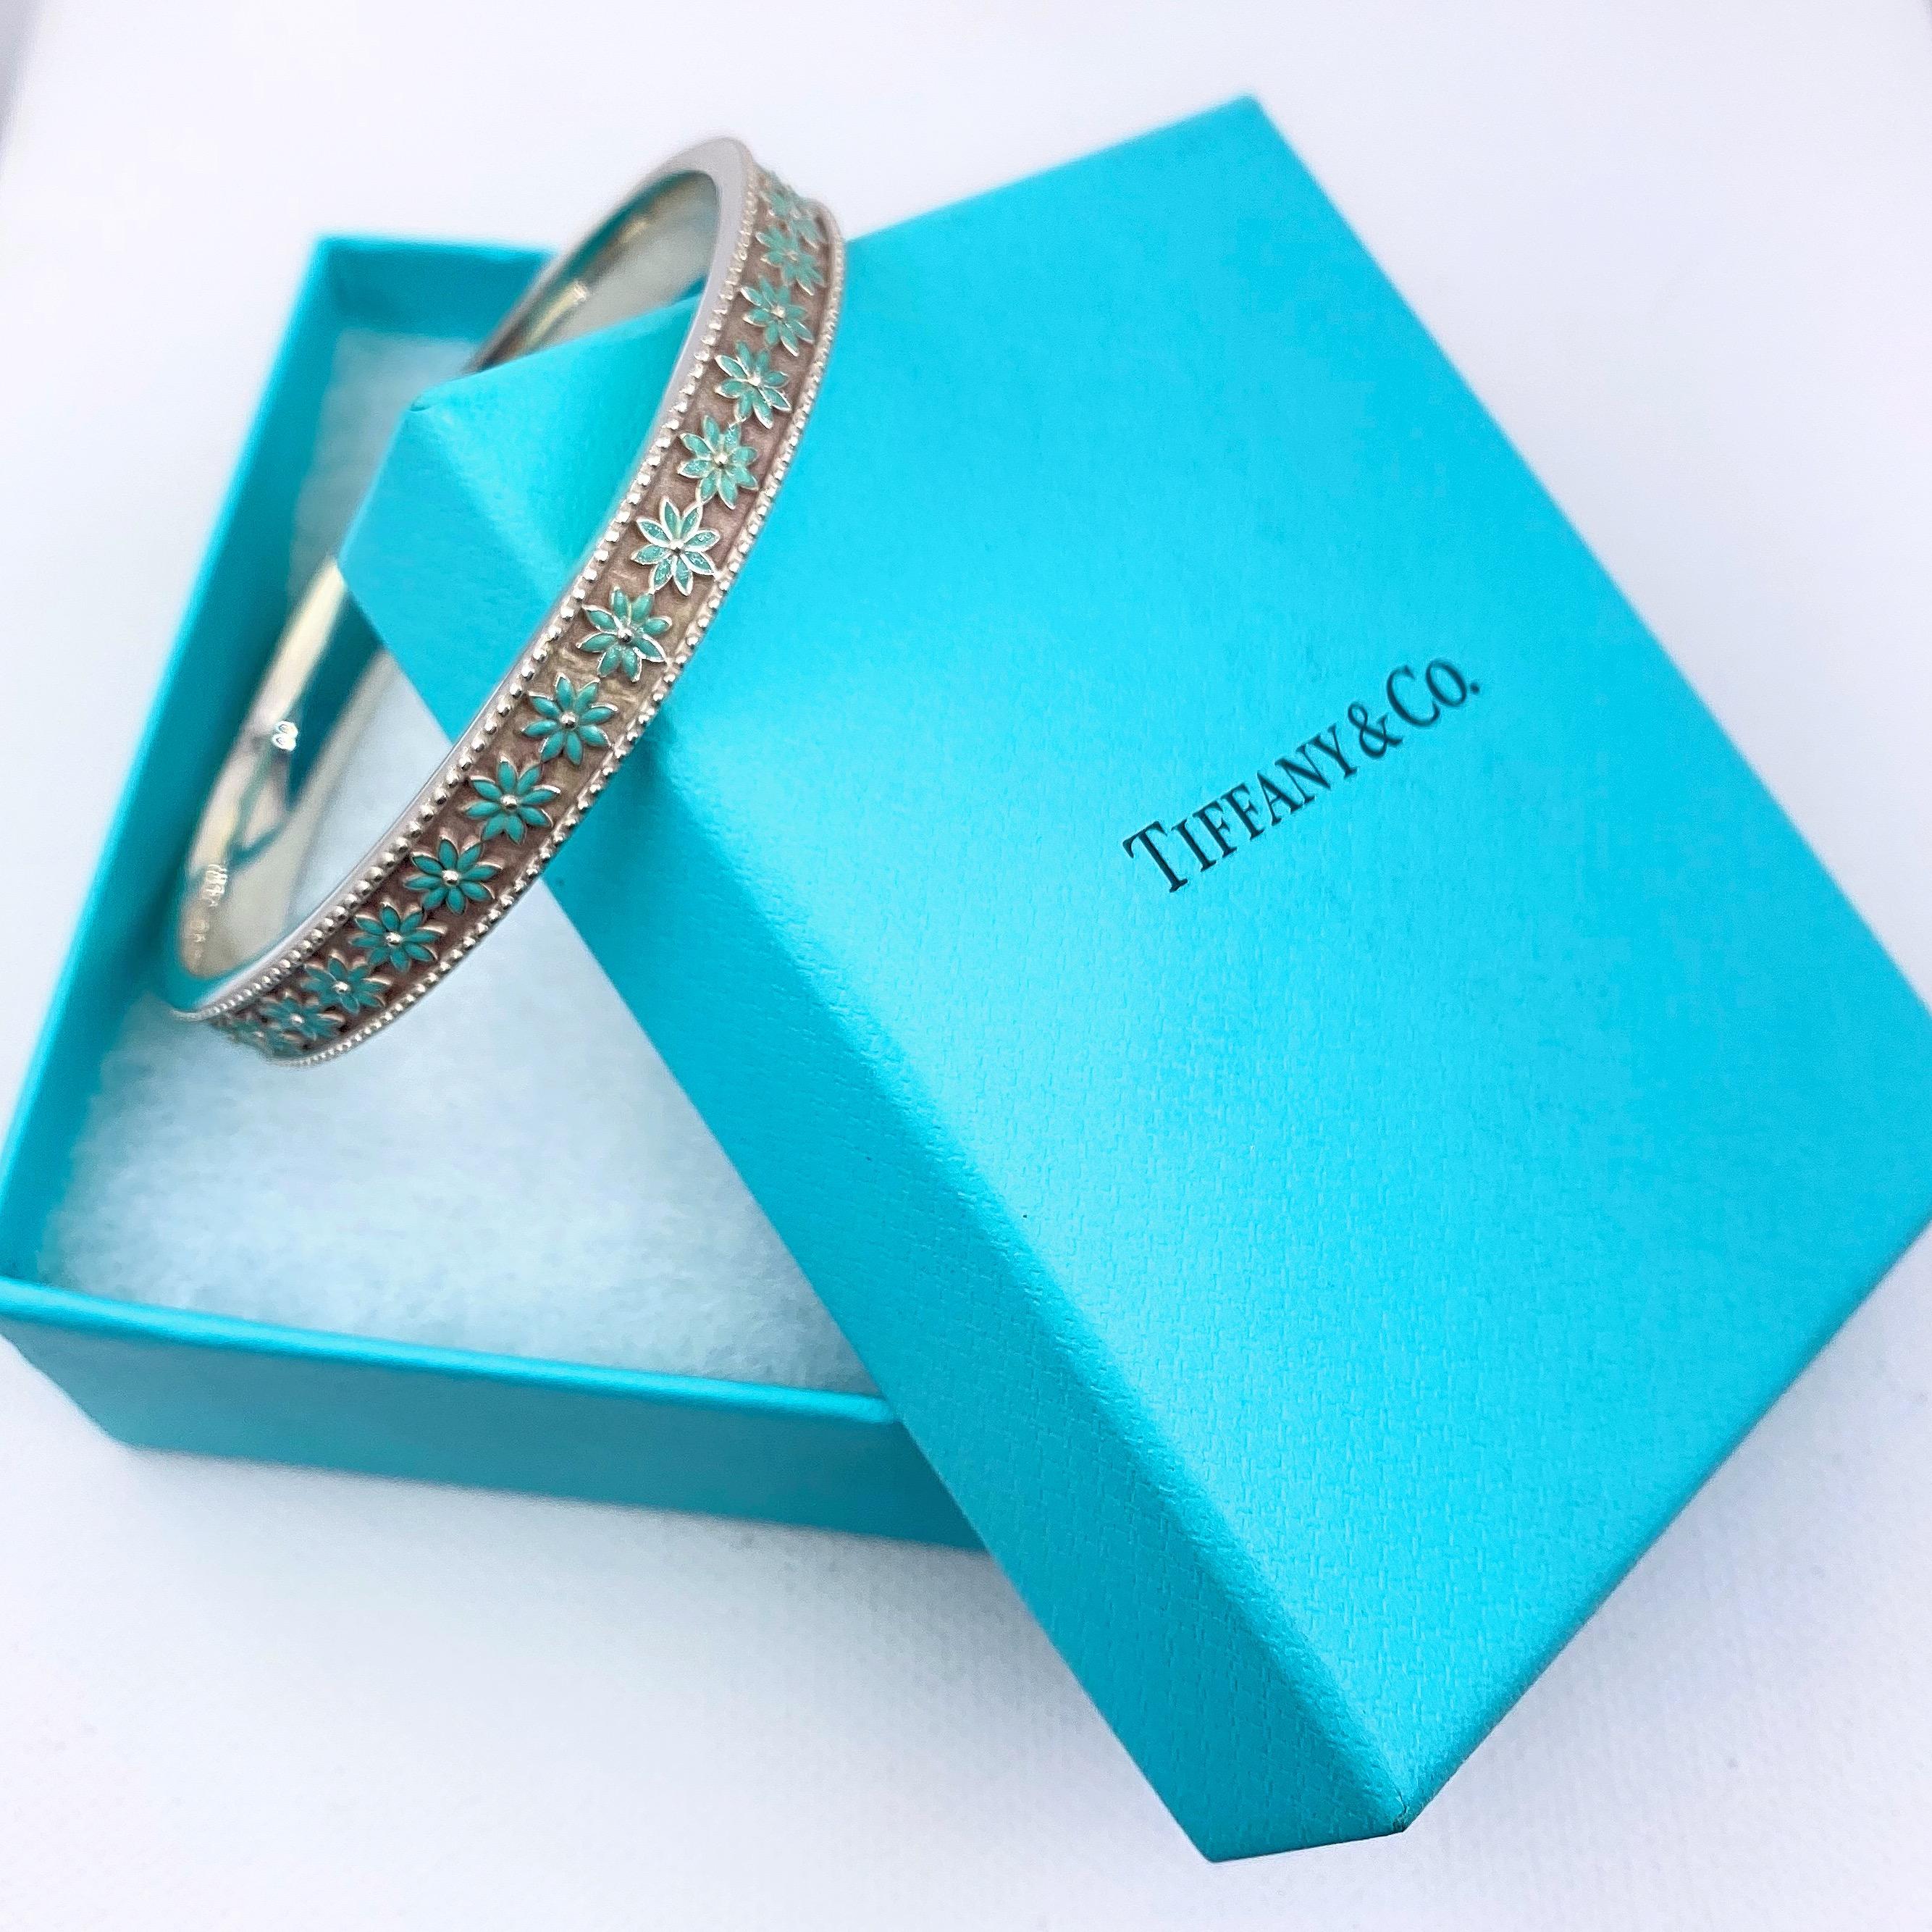 Tiffany & Co. Daisy Flower Bangle Bracelet
Style:  Daisy Flower Bangle
Metal:  Blue Enamel with Sterling Silver
Size:  Large - 8.5 inches inside circumference - 2.5 inches diameter
Width:  1/2 width ( 12 MM )
Hallmark:  ©TIFFANY&CO.AG925
Includes: 